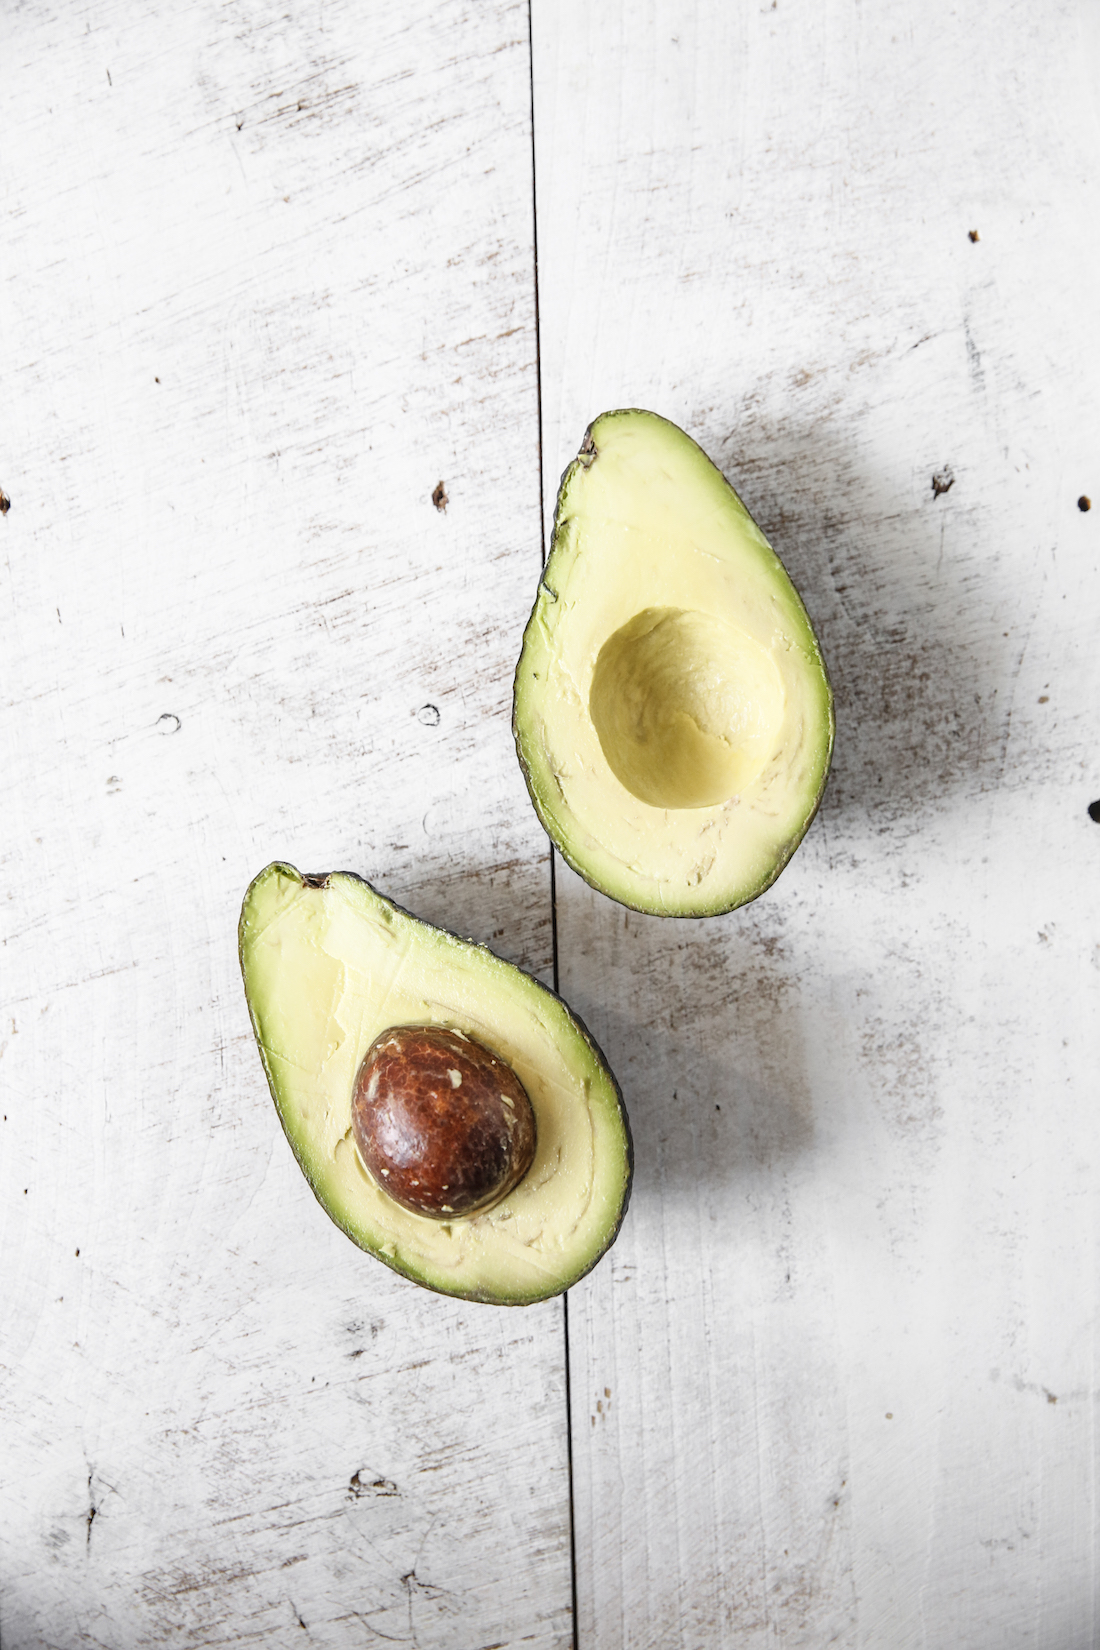 The king of healthy fats! In salads, in smoothies, on toast, or just with a spoon!